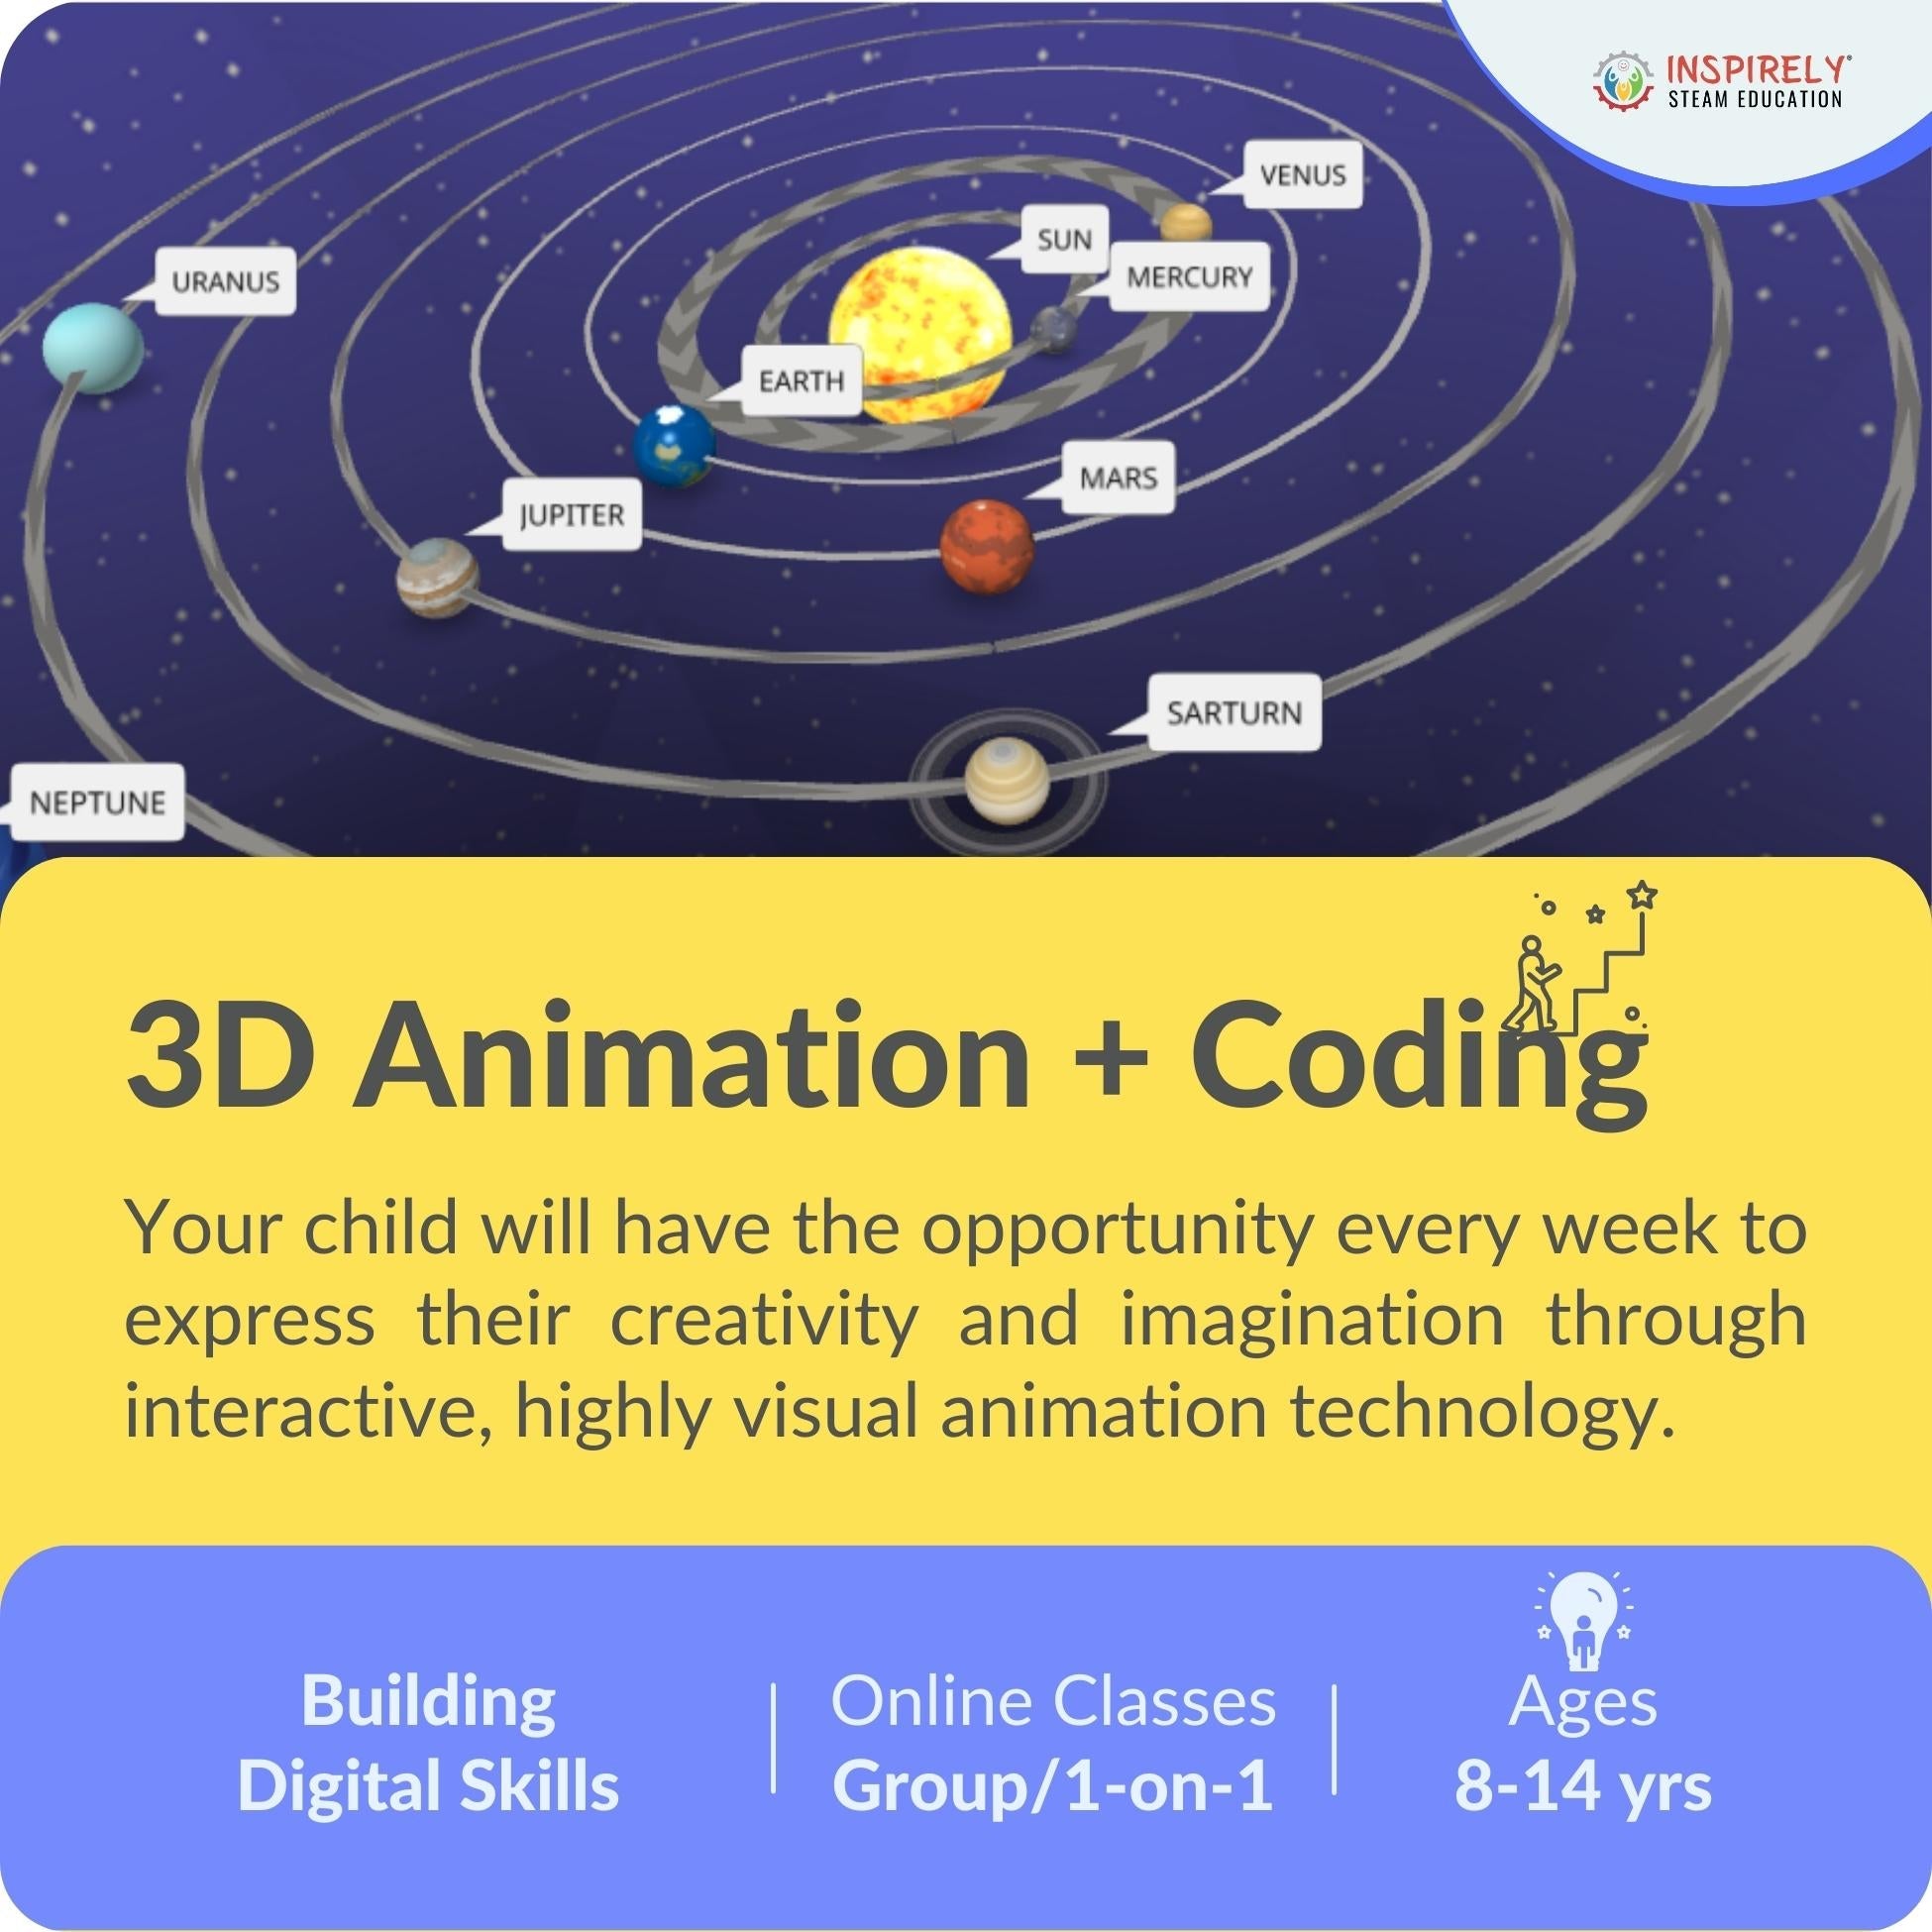 INSPIRELY Canada & USA 3D Animation with coding tutoring Online classes for kids Children ages 8-14 years Live Canadian educators INSPIRELY | STEAM education Fun and interactive classes Imagination come to life Basic coding skills Experienced instructors Creative learning experience Targeted towards parents & schools brampton, Mississauga georgetown orangeville caledon cambridge ontario kitchener waterloo  Edit alt text